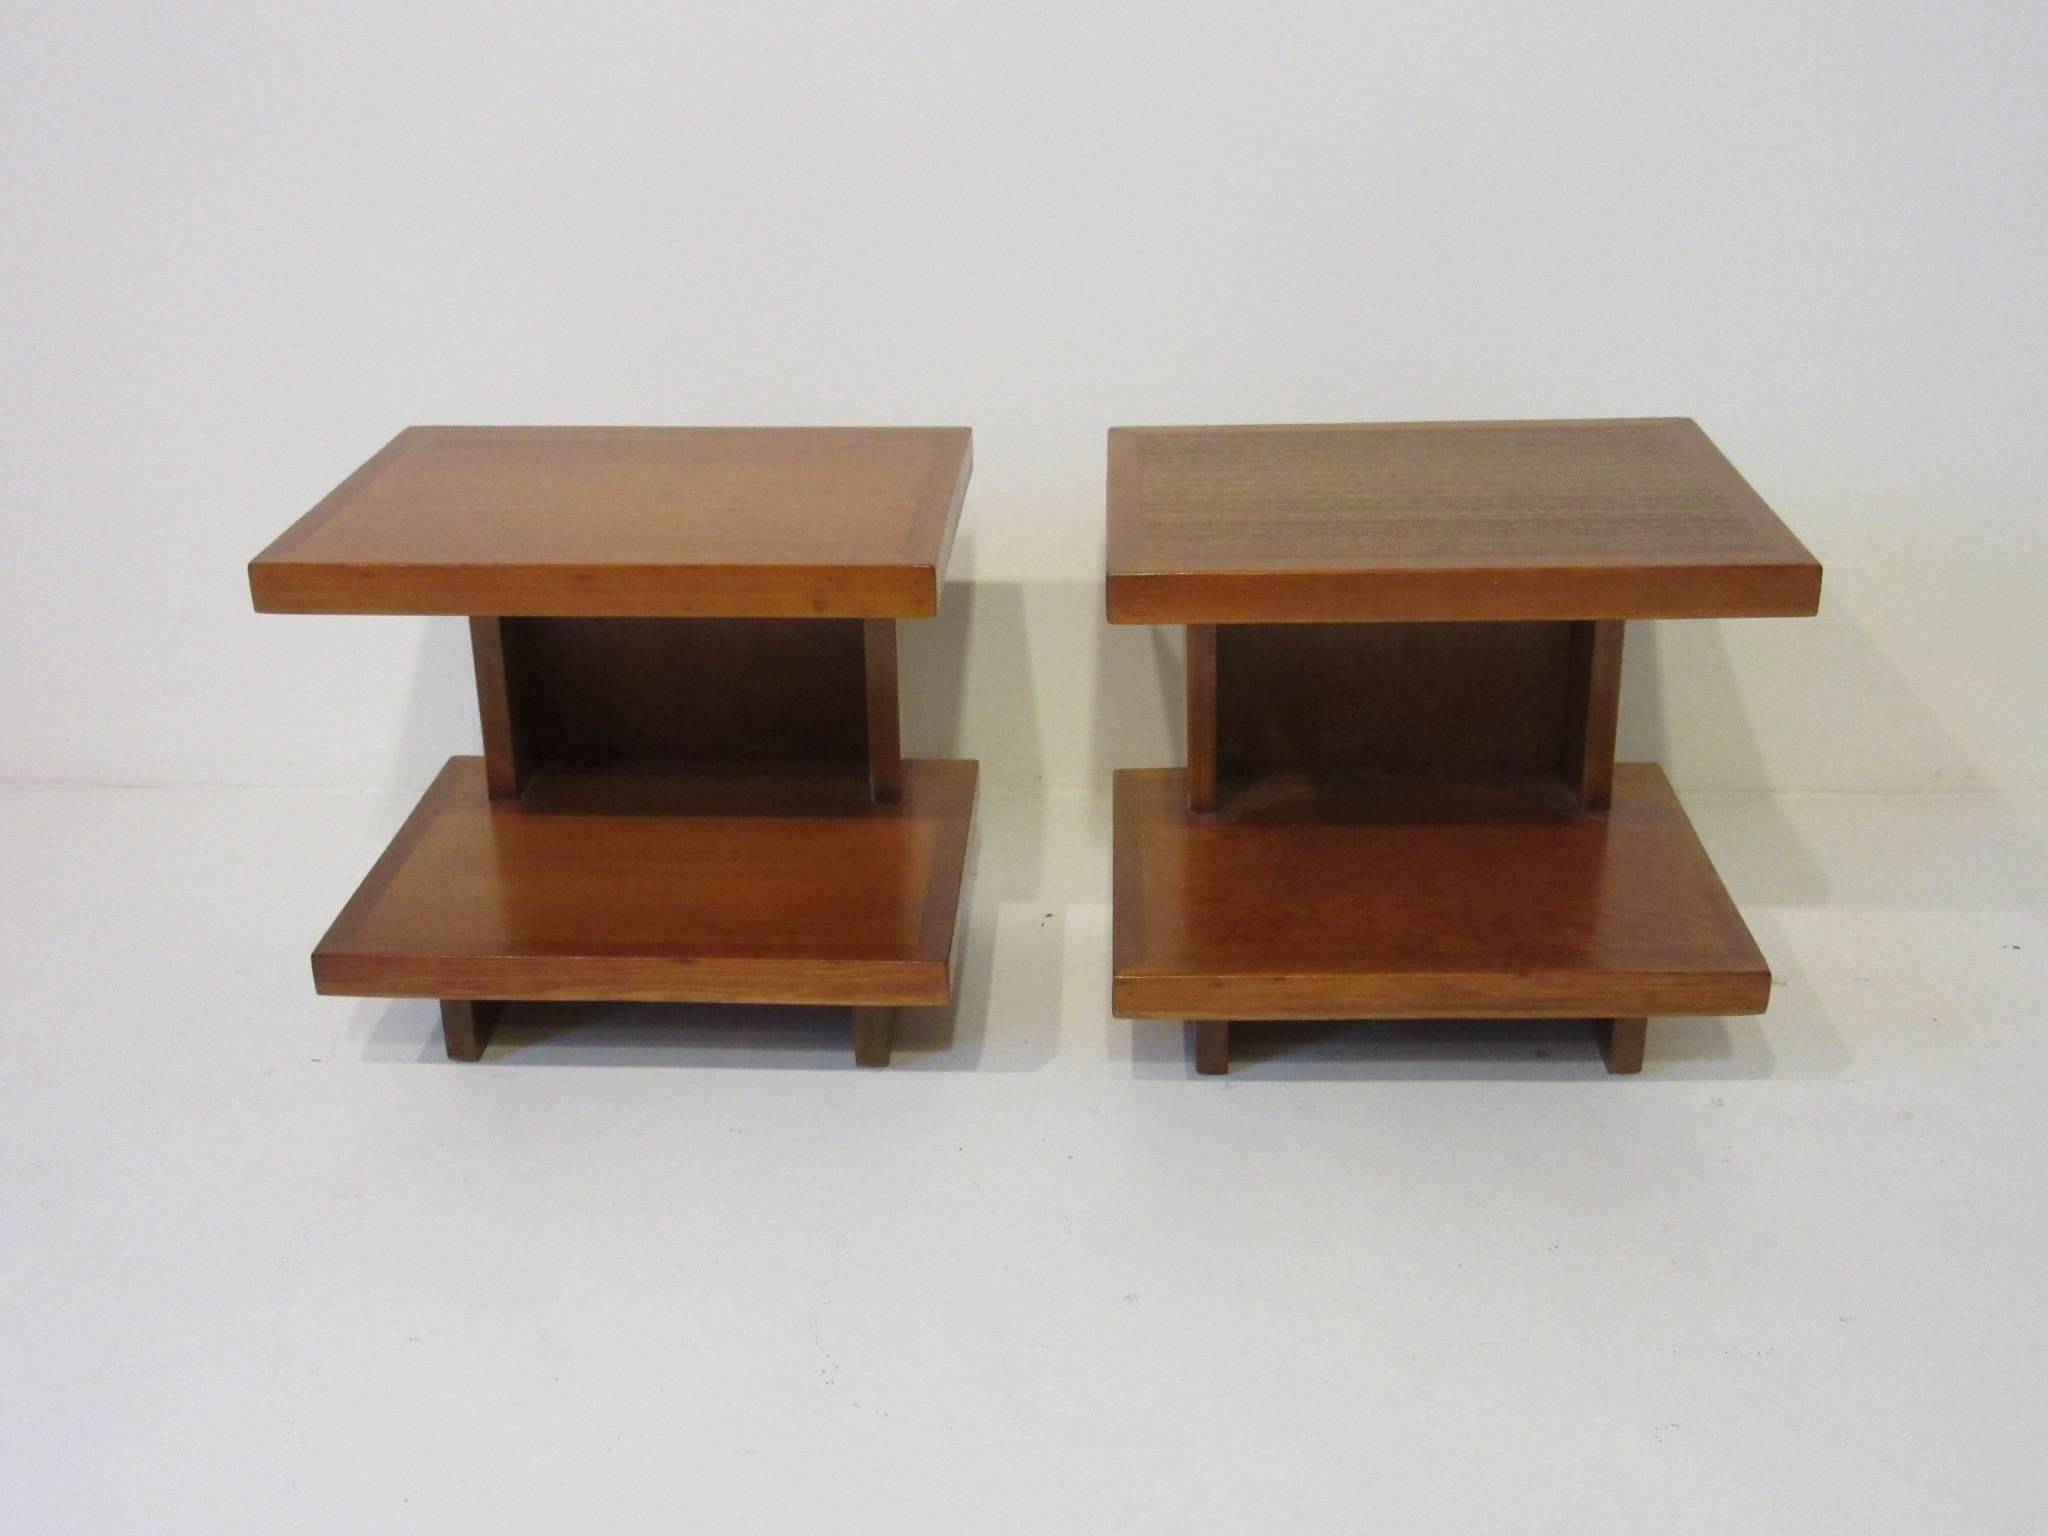 An important and rare pair of Frank Lloyd Wright side tables made for the Levin house in Kalamazoo Michigan. From the first house built in Parkwyn Village a planned community of Usonian homes formed by a group of forward thinking employees of the